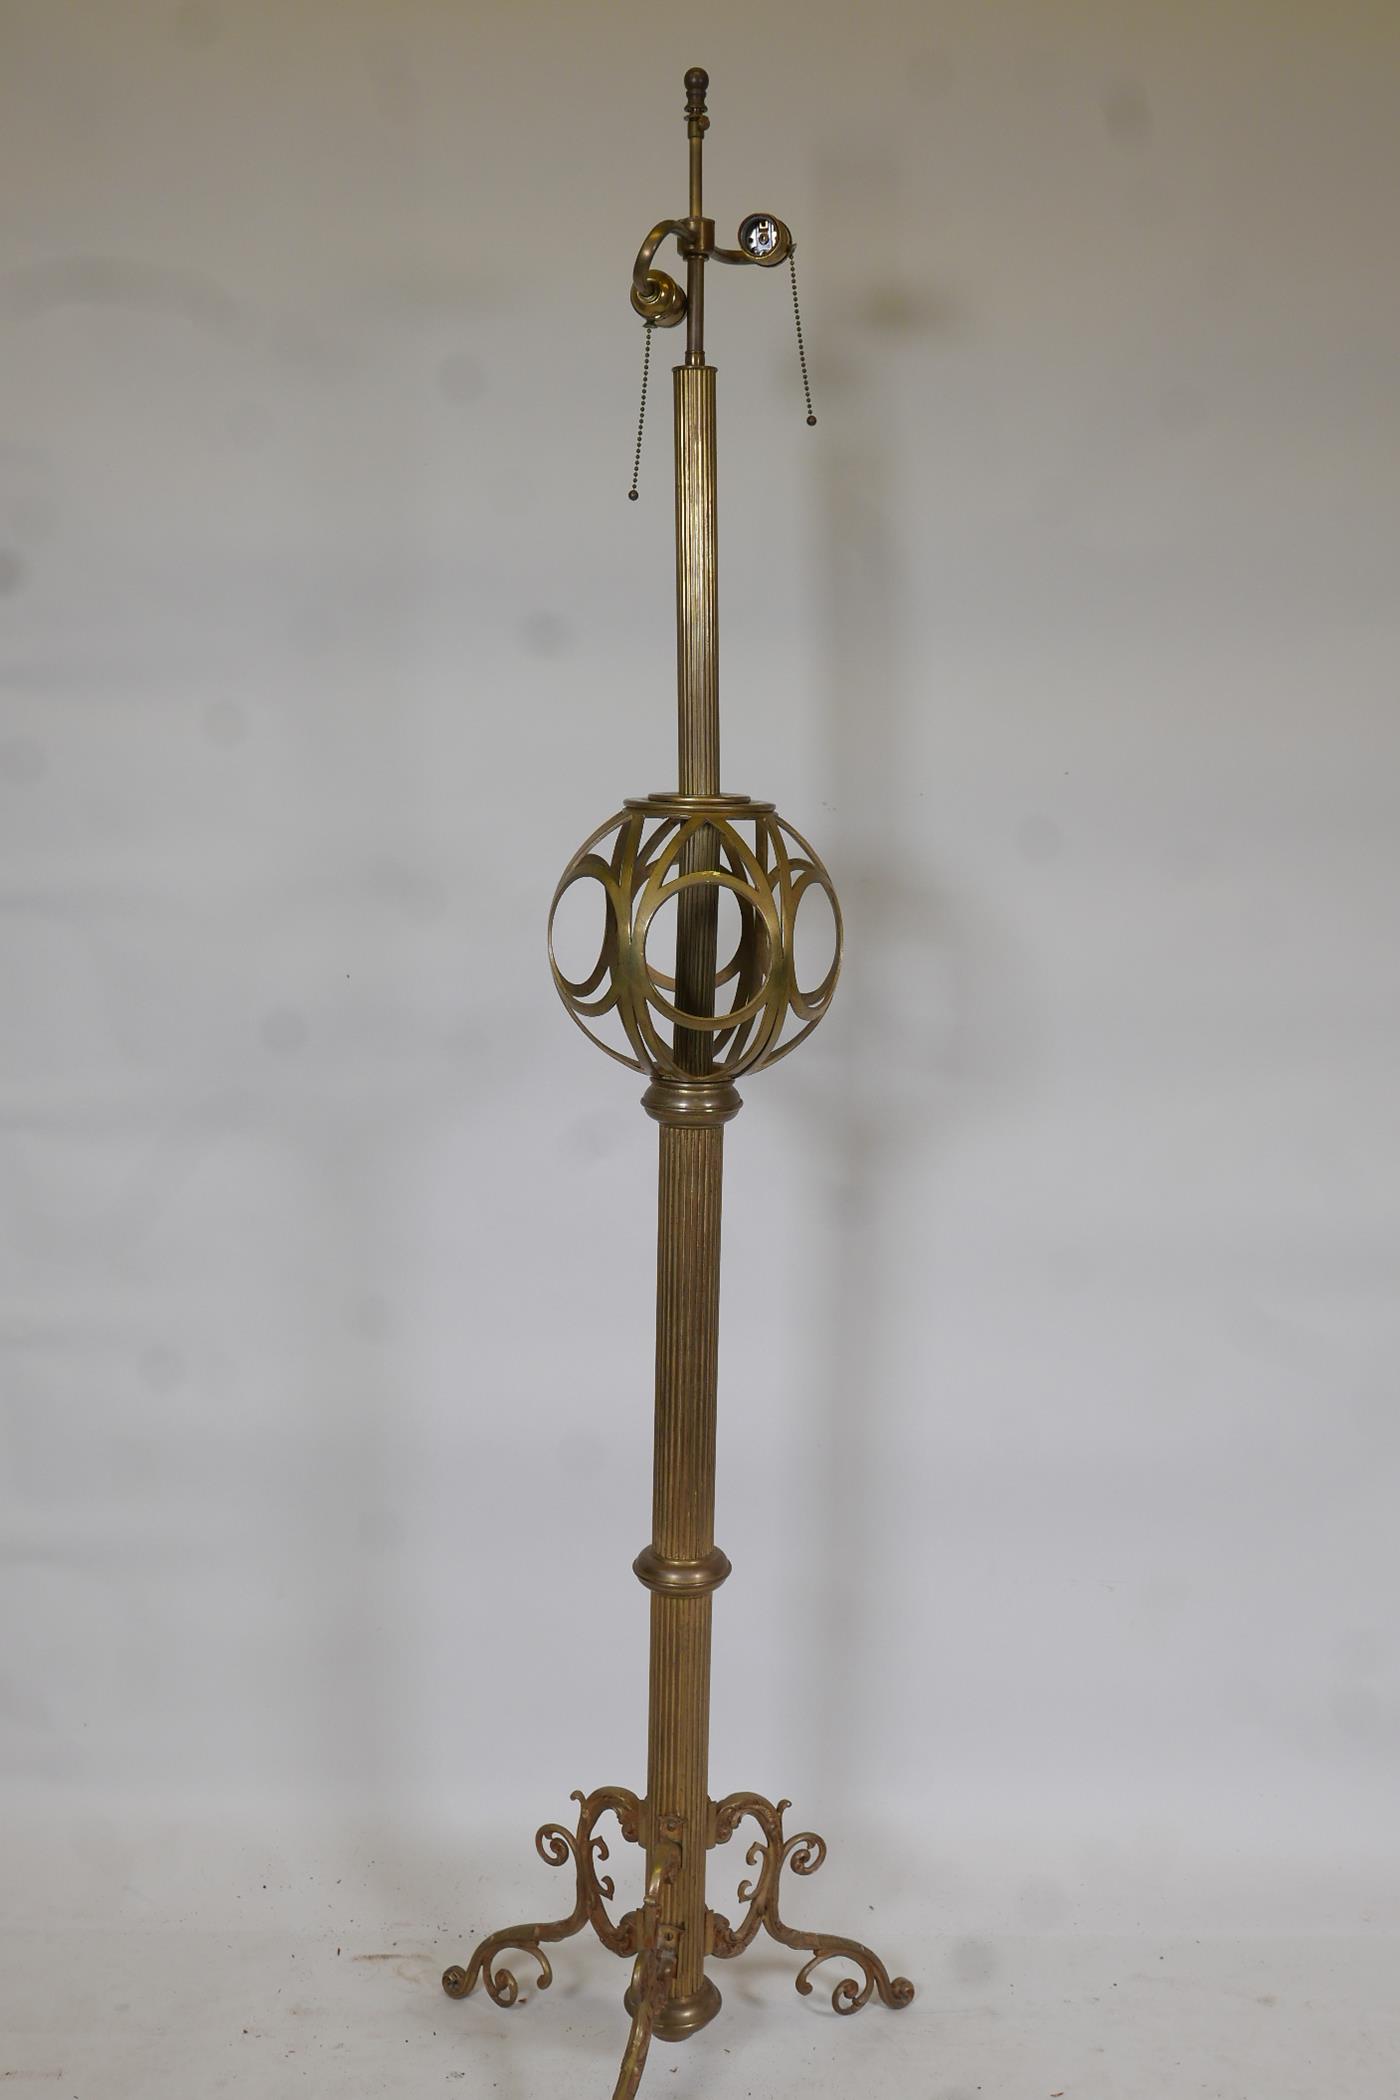 A brass floor lamp with fluted column and pierced globe decoration, 65" high - Image 2 of 2